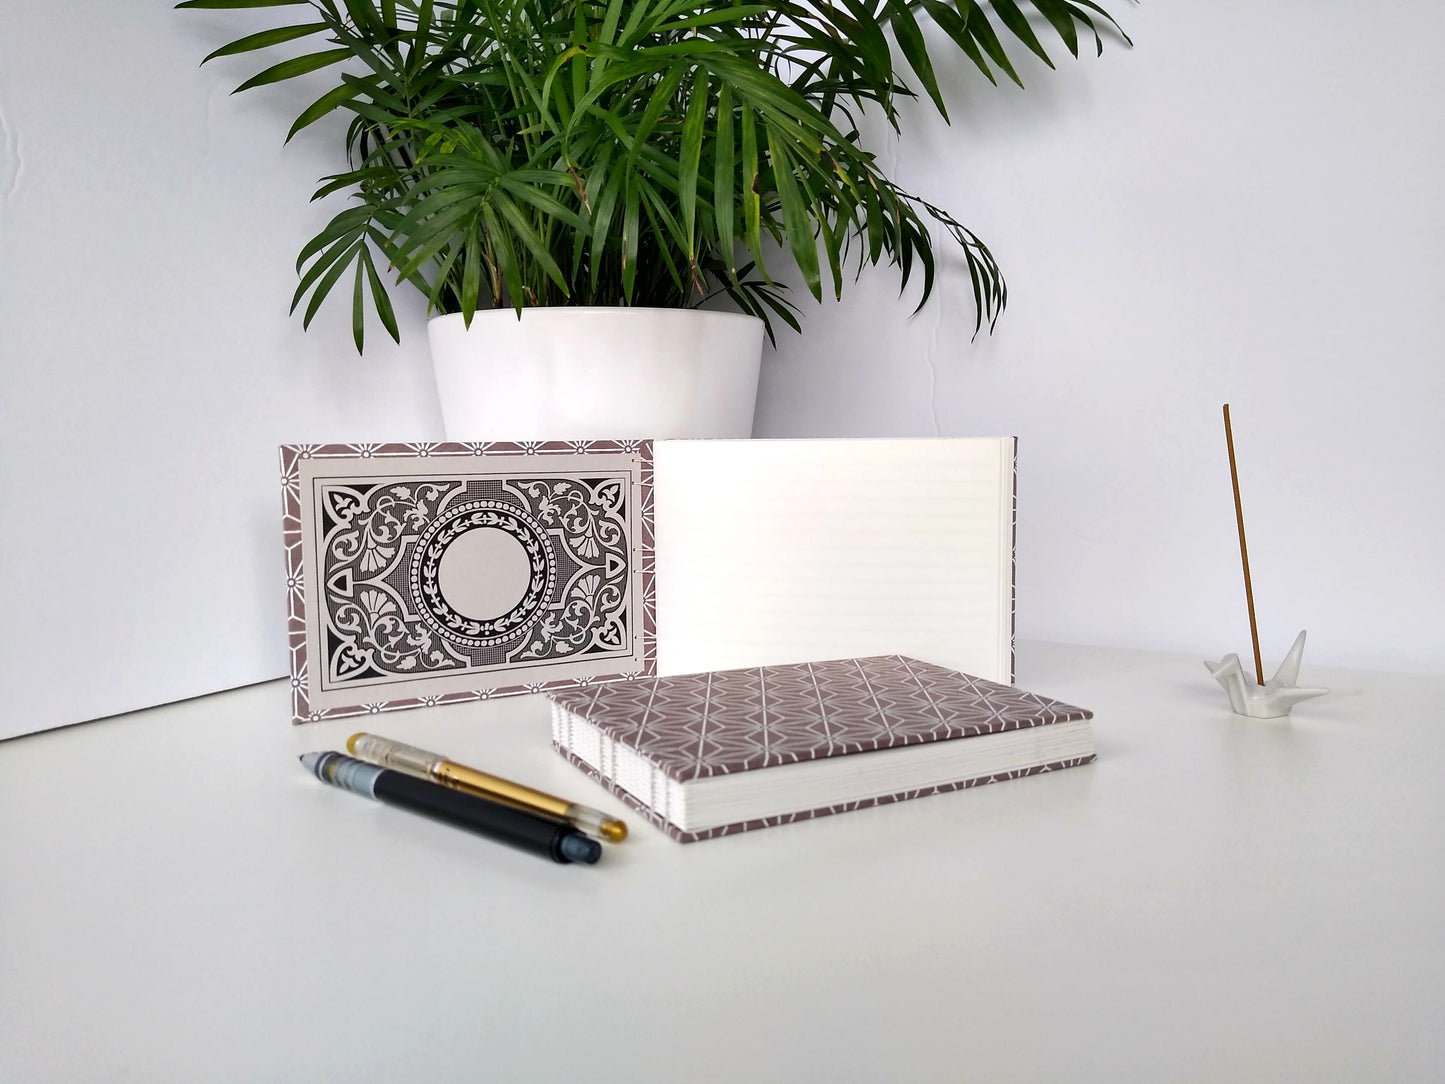 Two handmade journals are positioned beside a potted plant, a ceramic crane, a gold pen, and a black mechanical pencil. One is laying flat and the other is standing upright, opened. It shows the inside endpaper, with an intricate floral and geometric bookplate and white pages. The cover of the journals are grey with a white asanoha pattern repeated over their entirety.